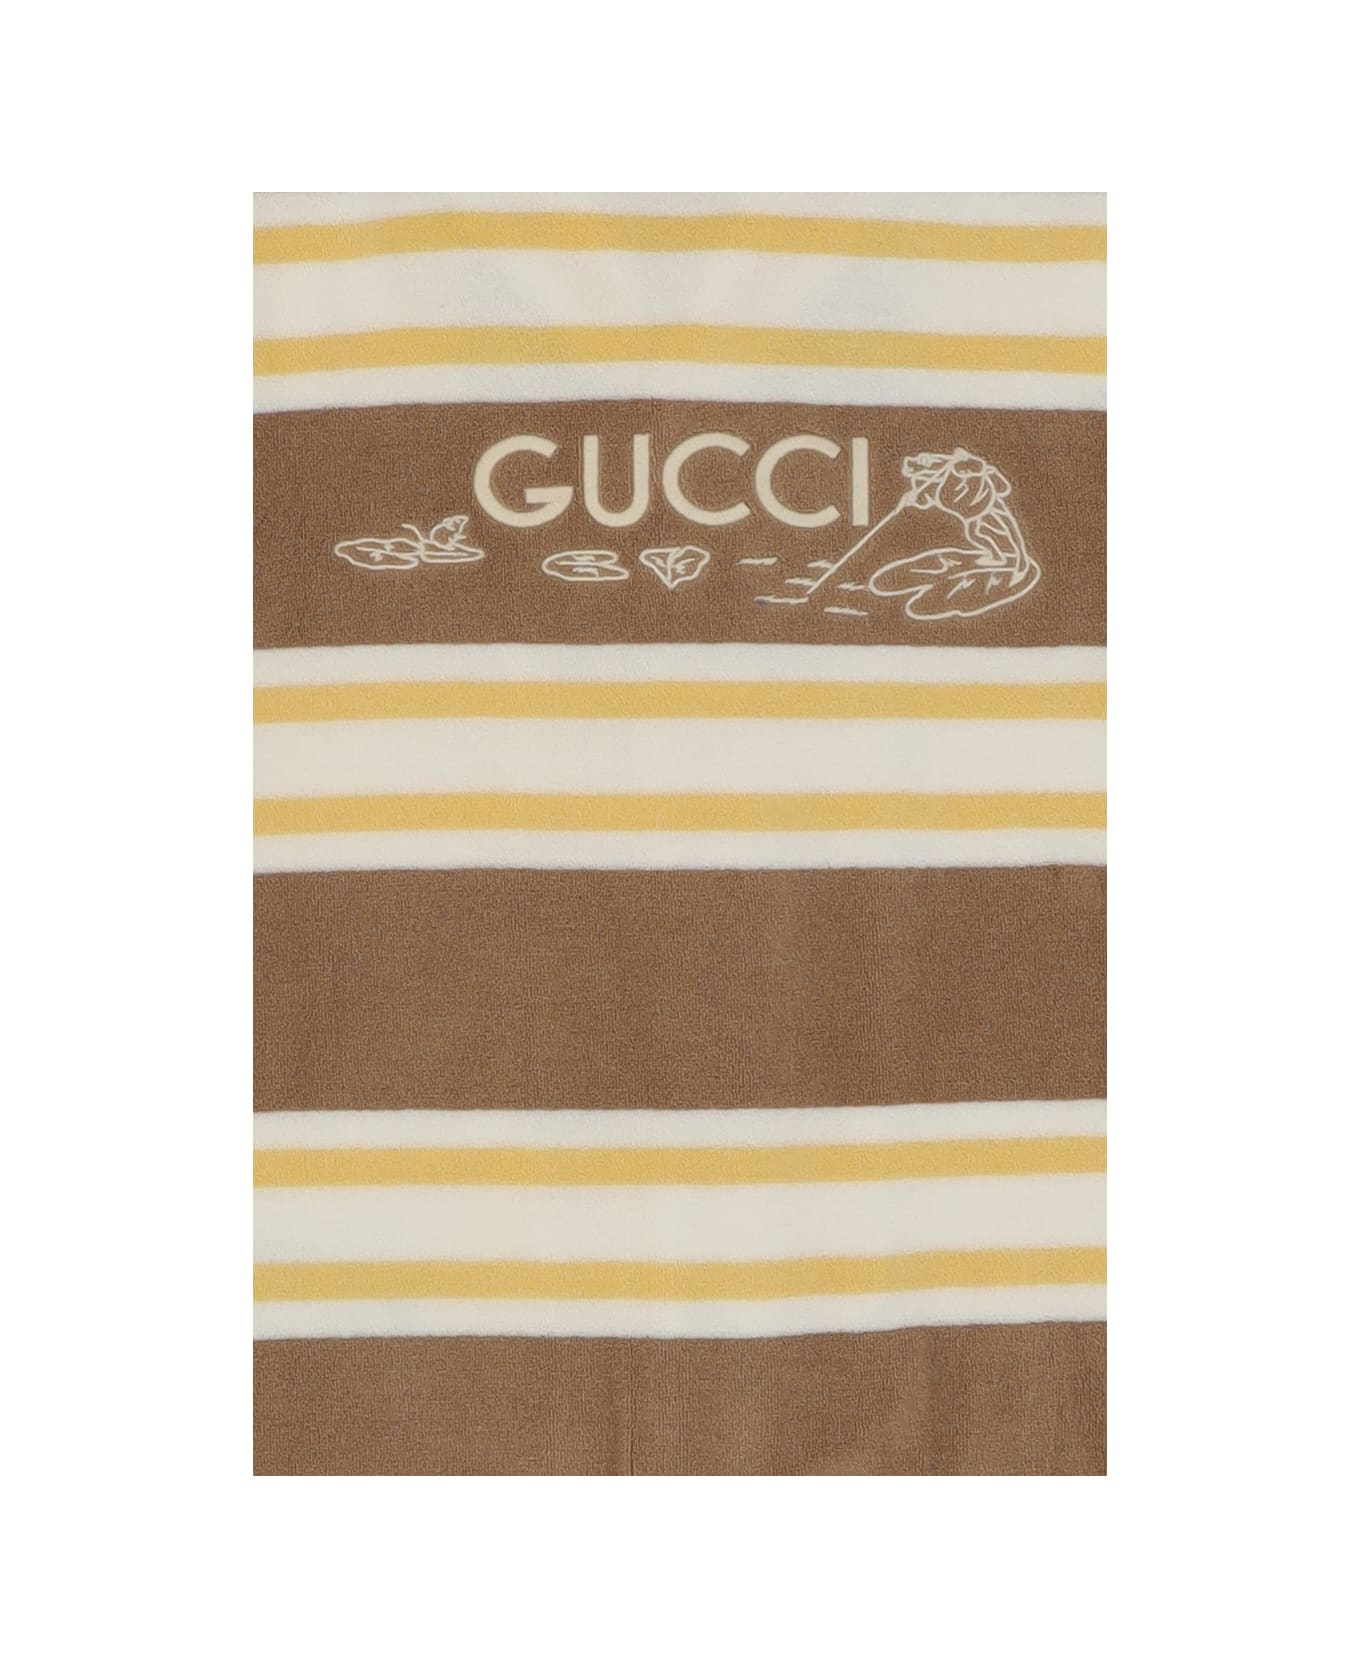 Gucci Shirt For Boy - Yellow/brown Tシャツ＆ポロシャツ